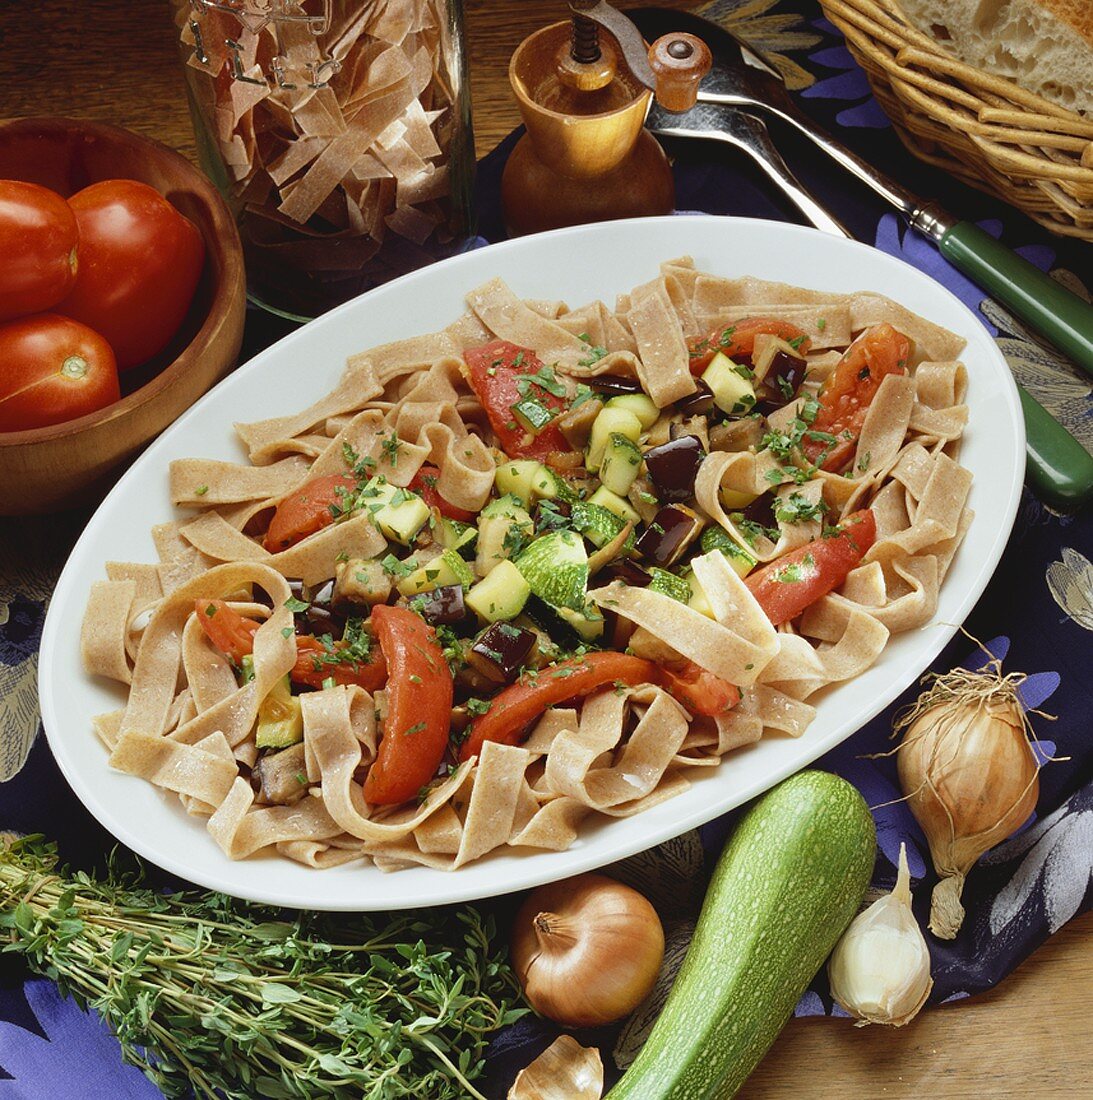 Wholemeal pasta with vegetables